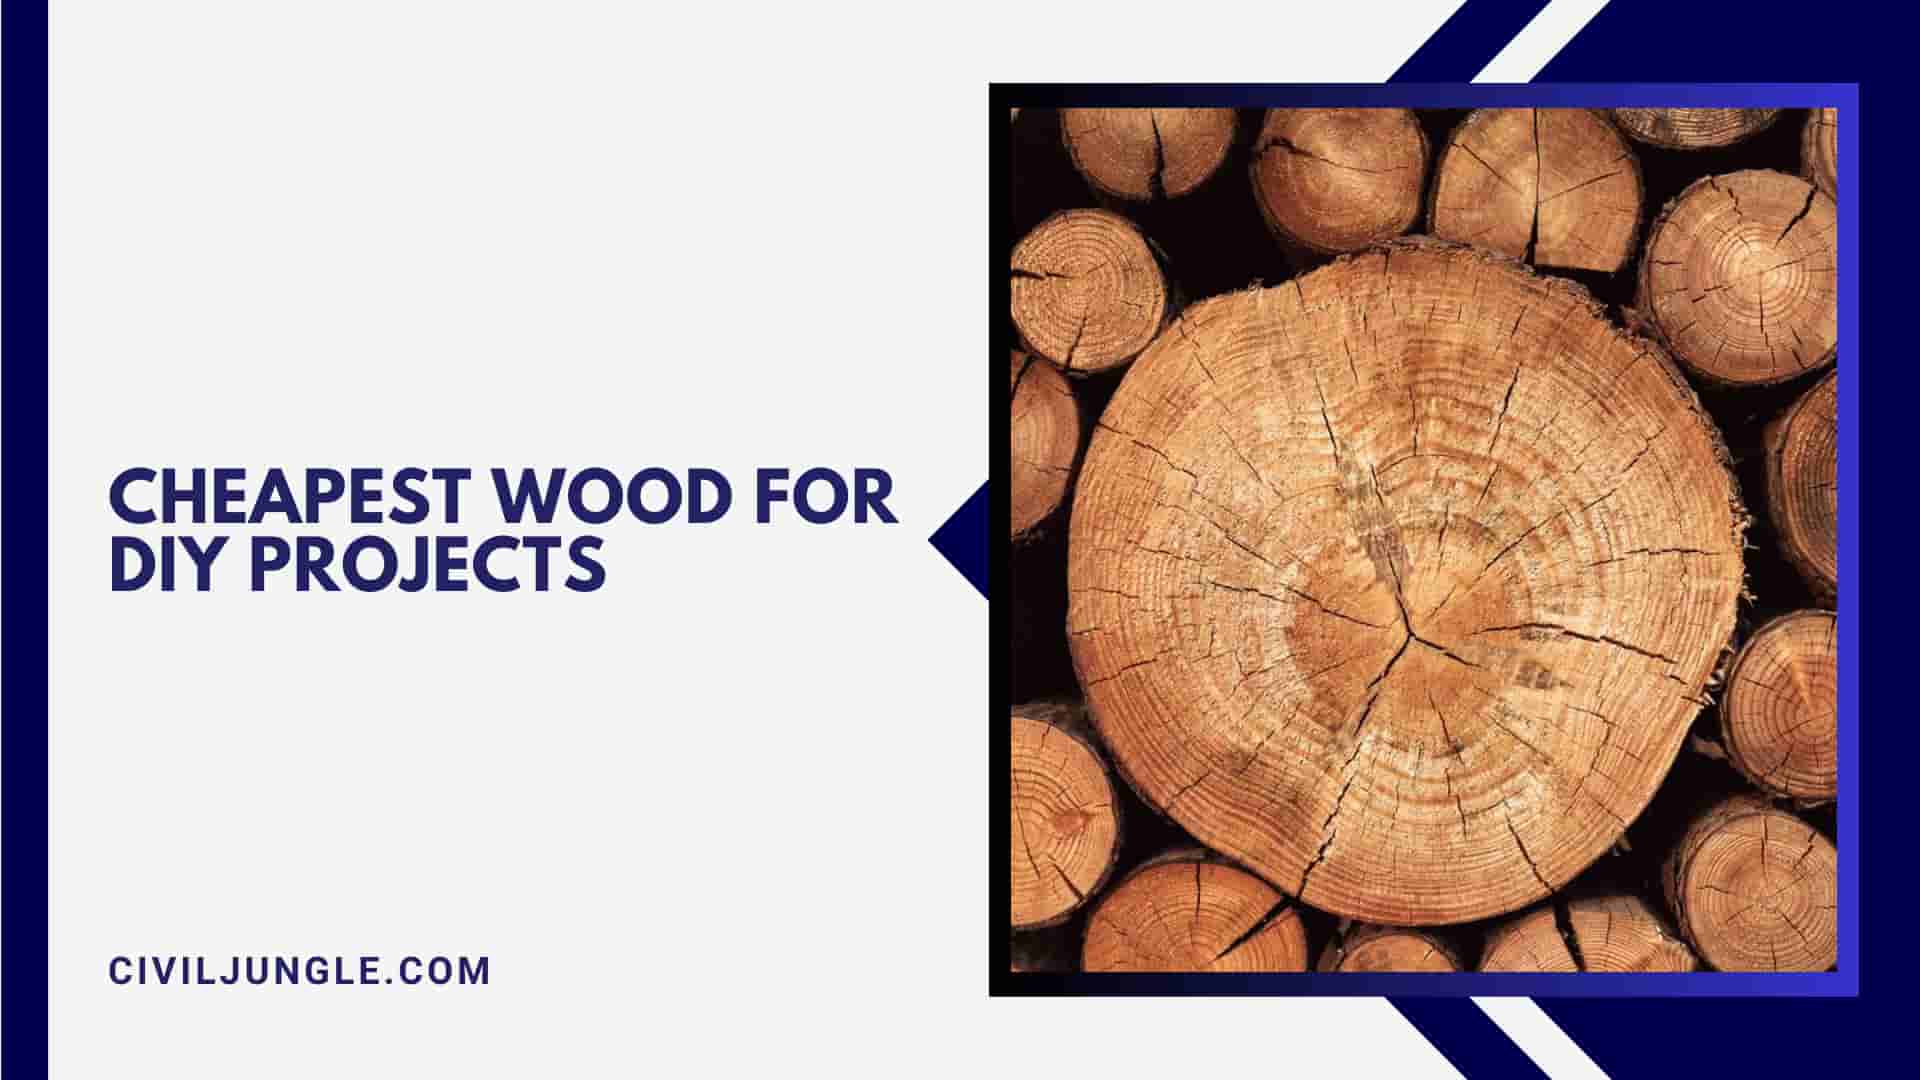 Cheapest Wood for Diy Projects